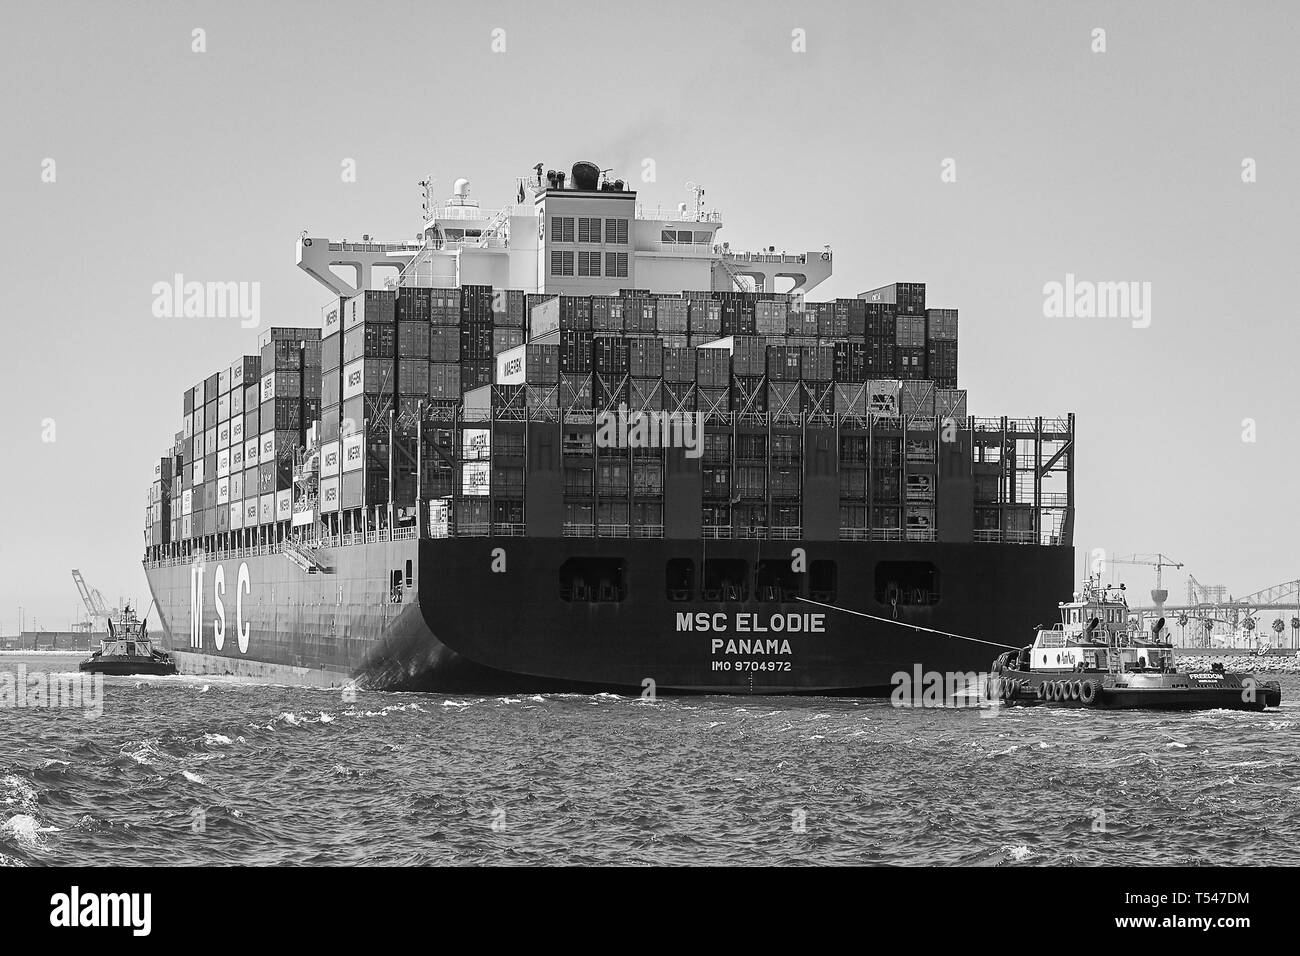 Black And White Photo Of The Container Ship, MSC ELODIE, Escorted By Tugs, Steaming Towards The Long Beach Container Terminal, California, USA. Stock Photo